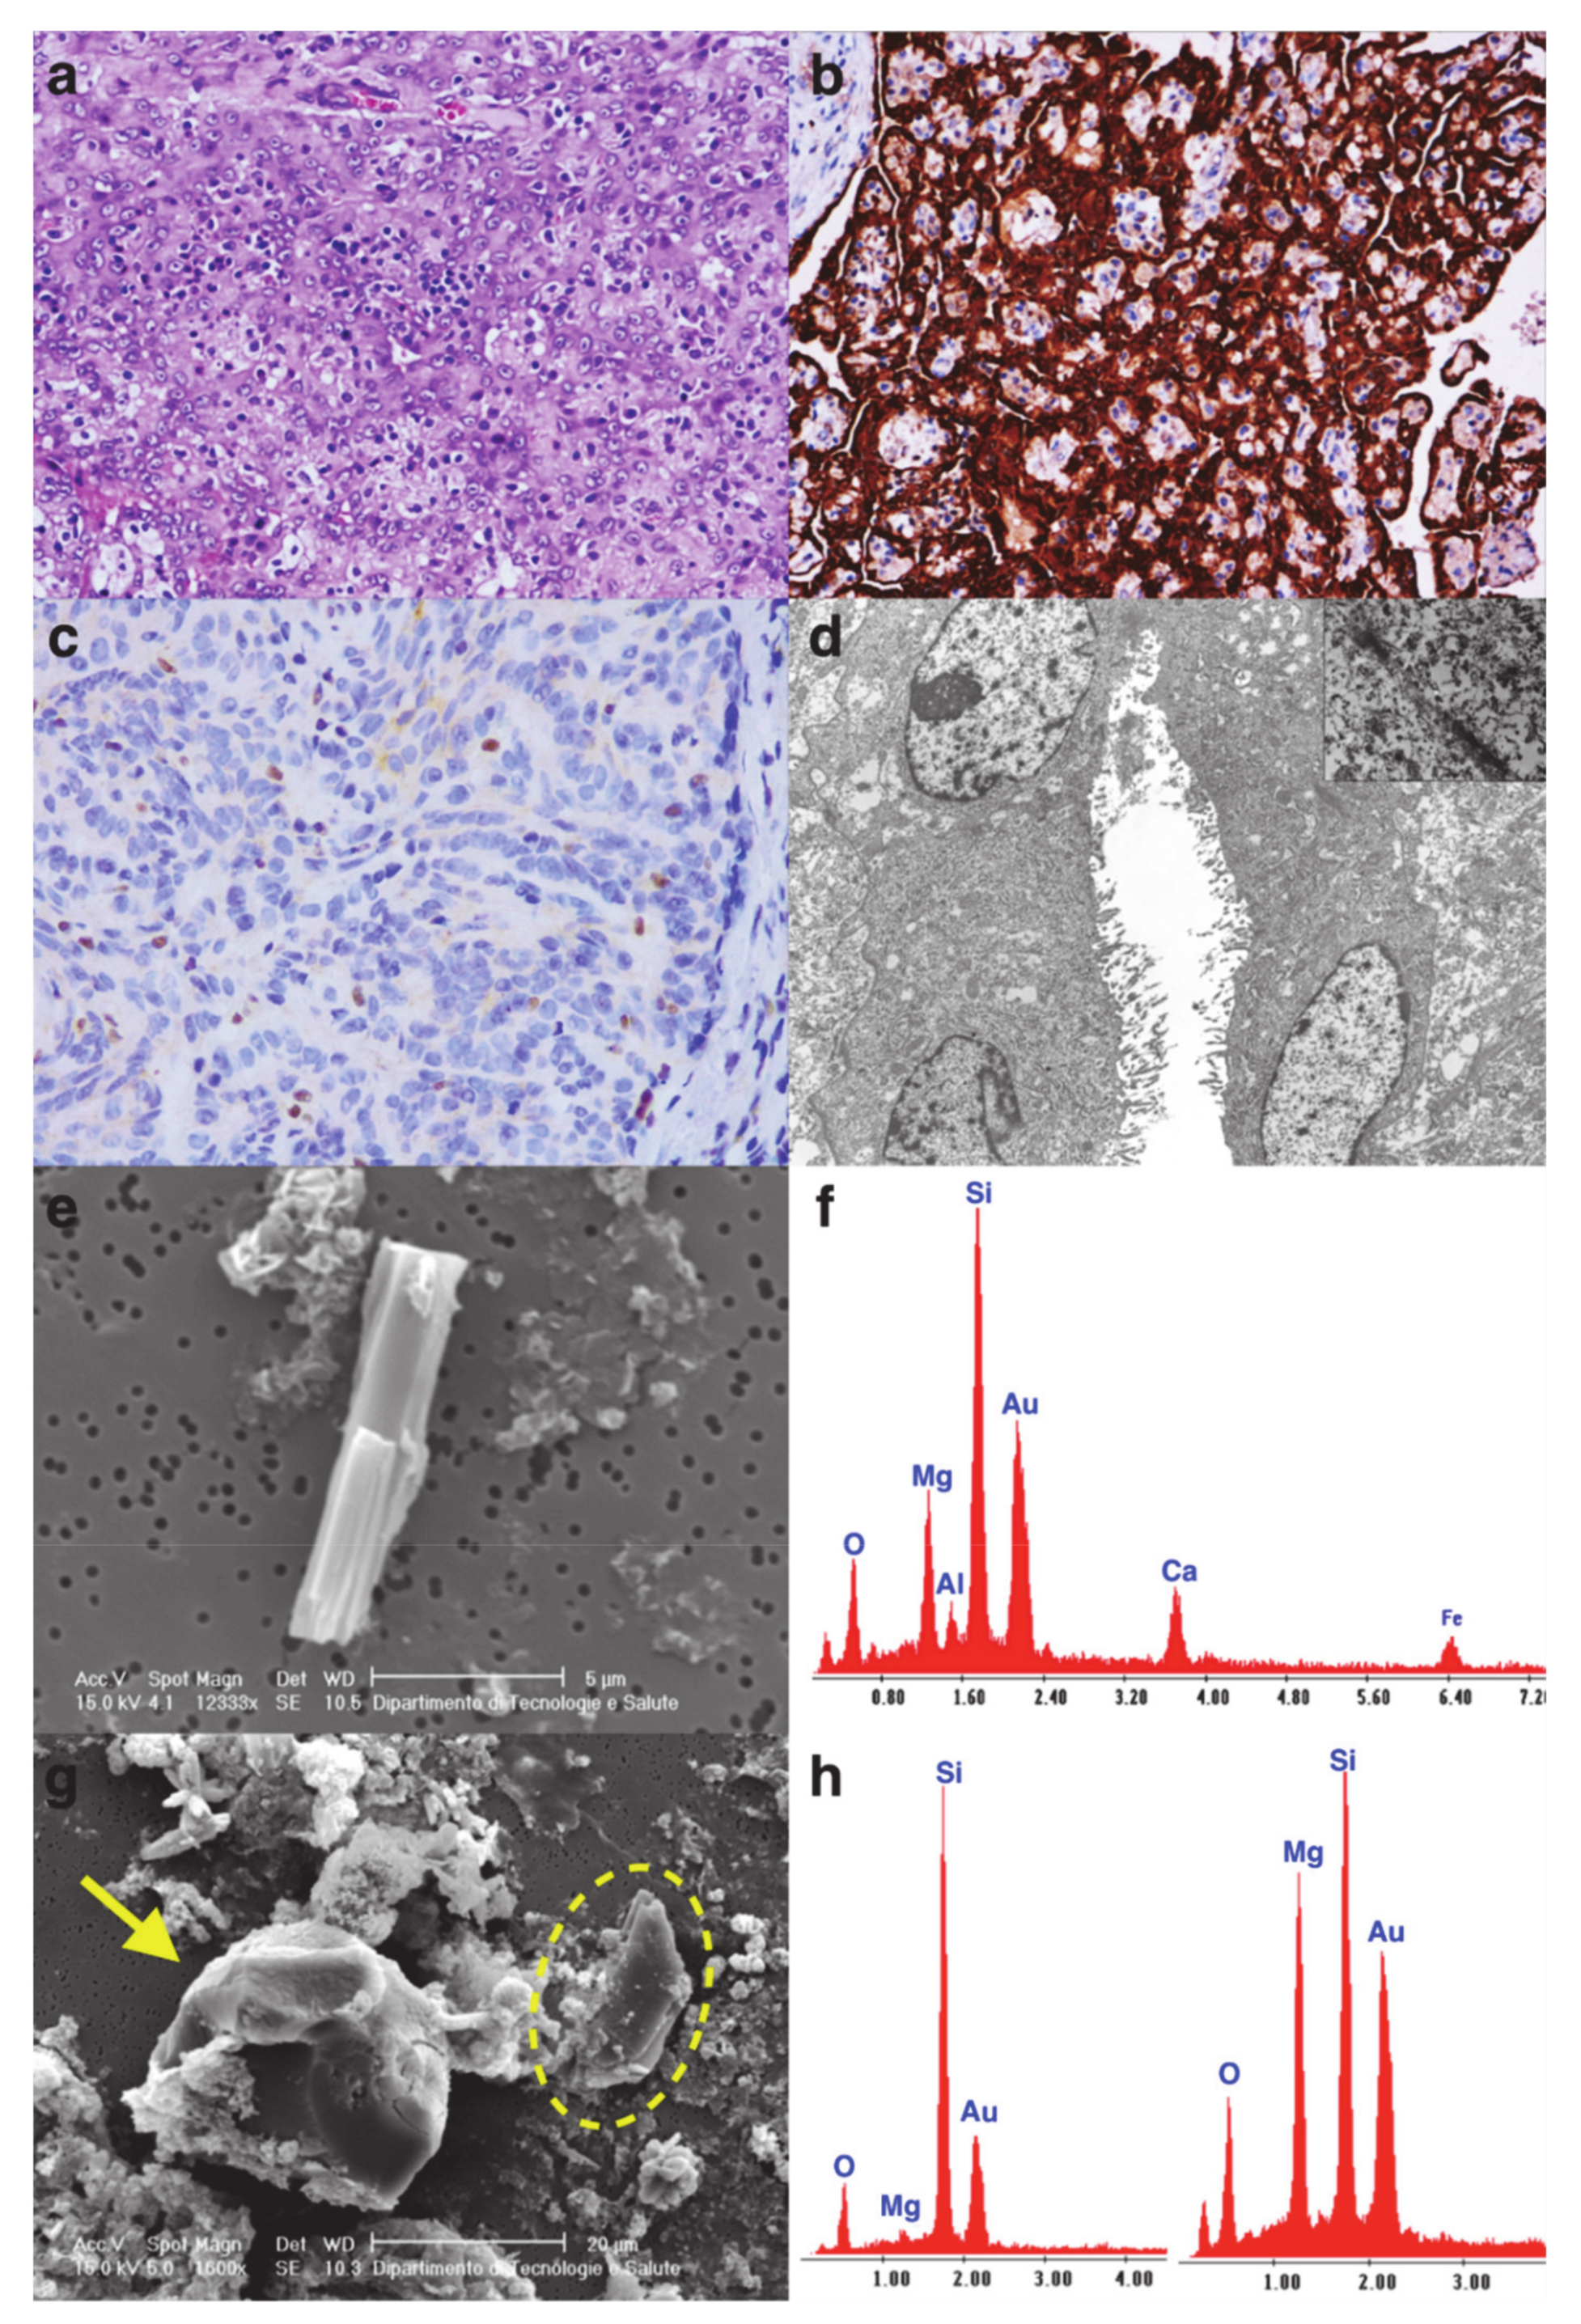 Cancers | Free Full-Text | Primary Ovarian Mesothelioma: A Case Series with  Electron Microscopy Examination and Review of the Literature